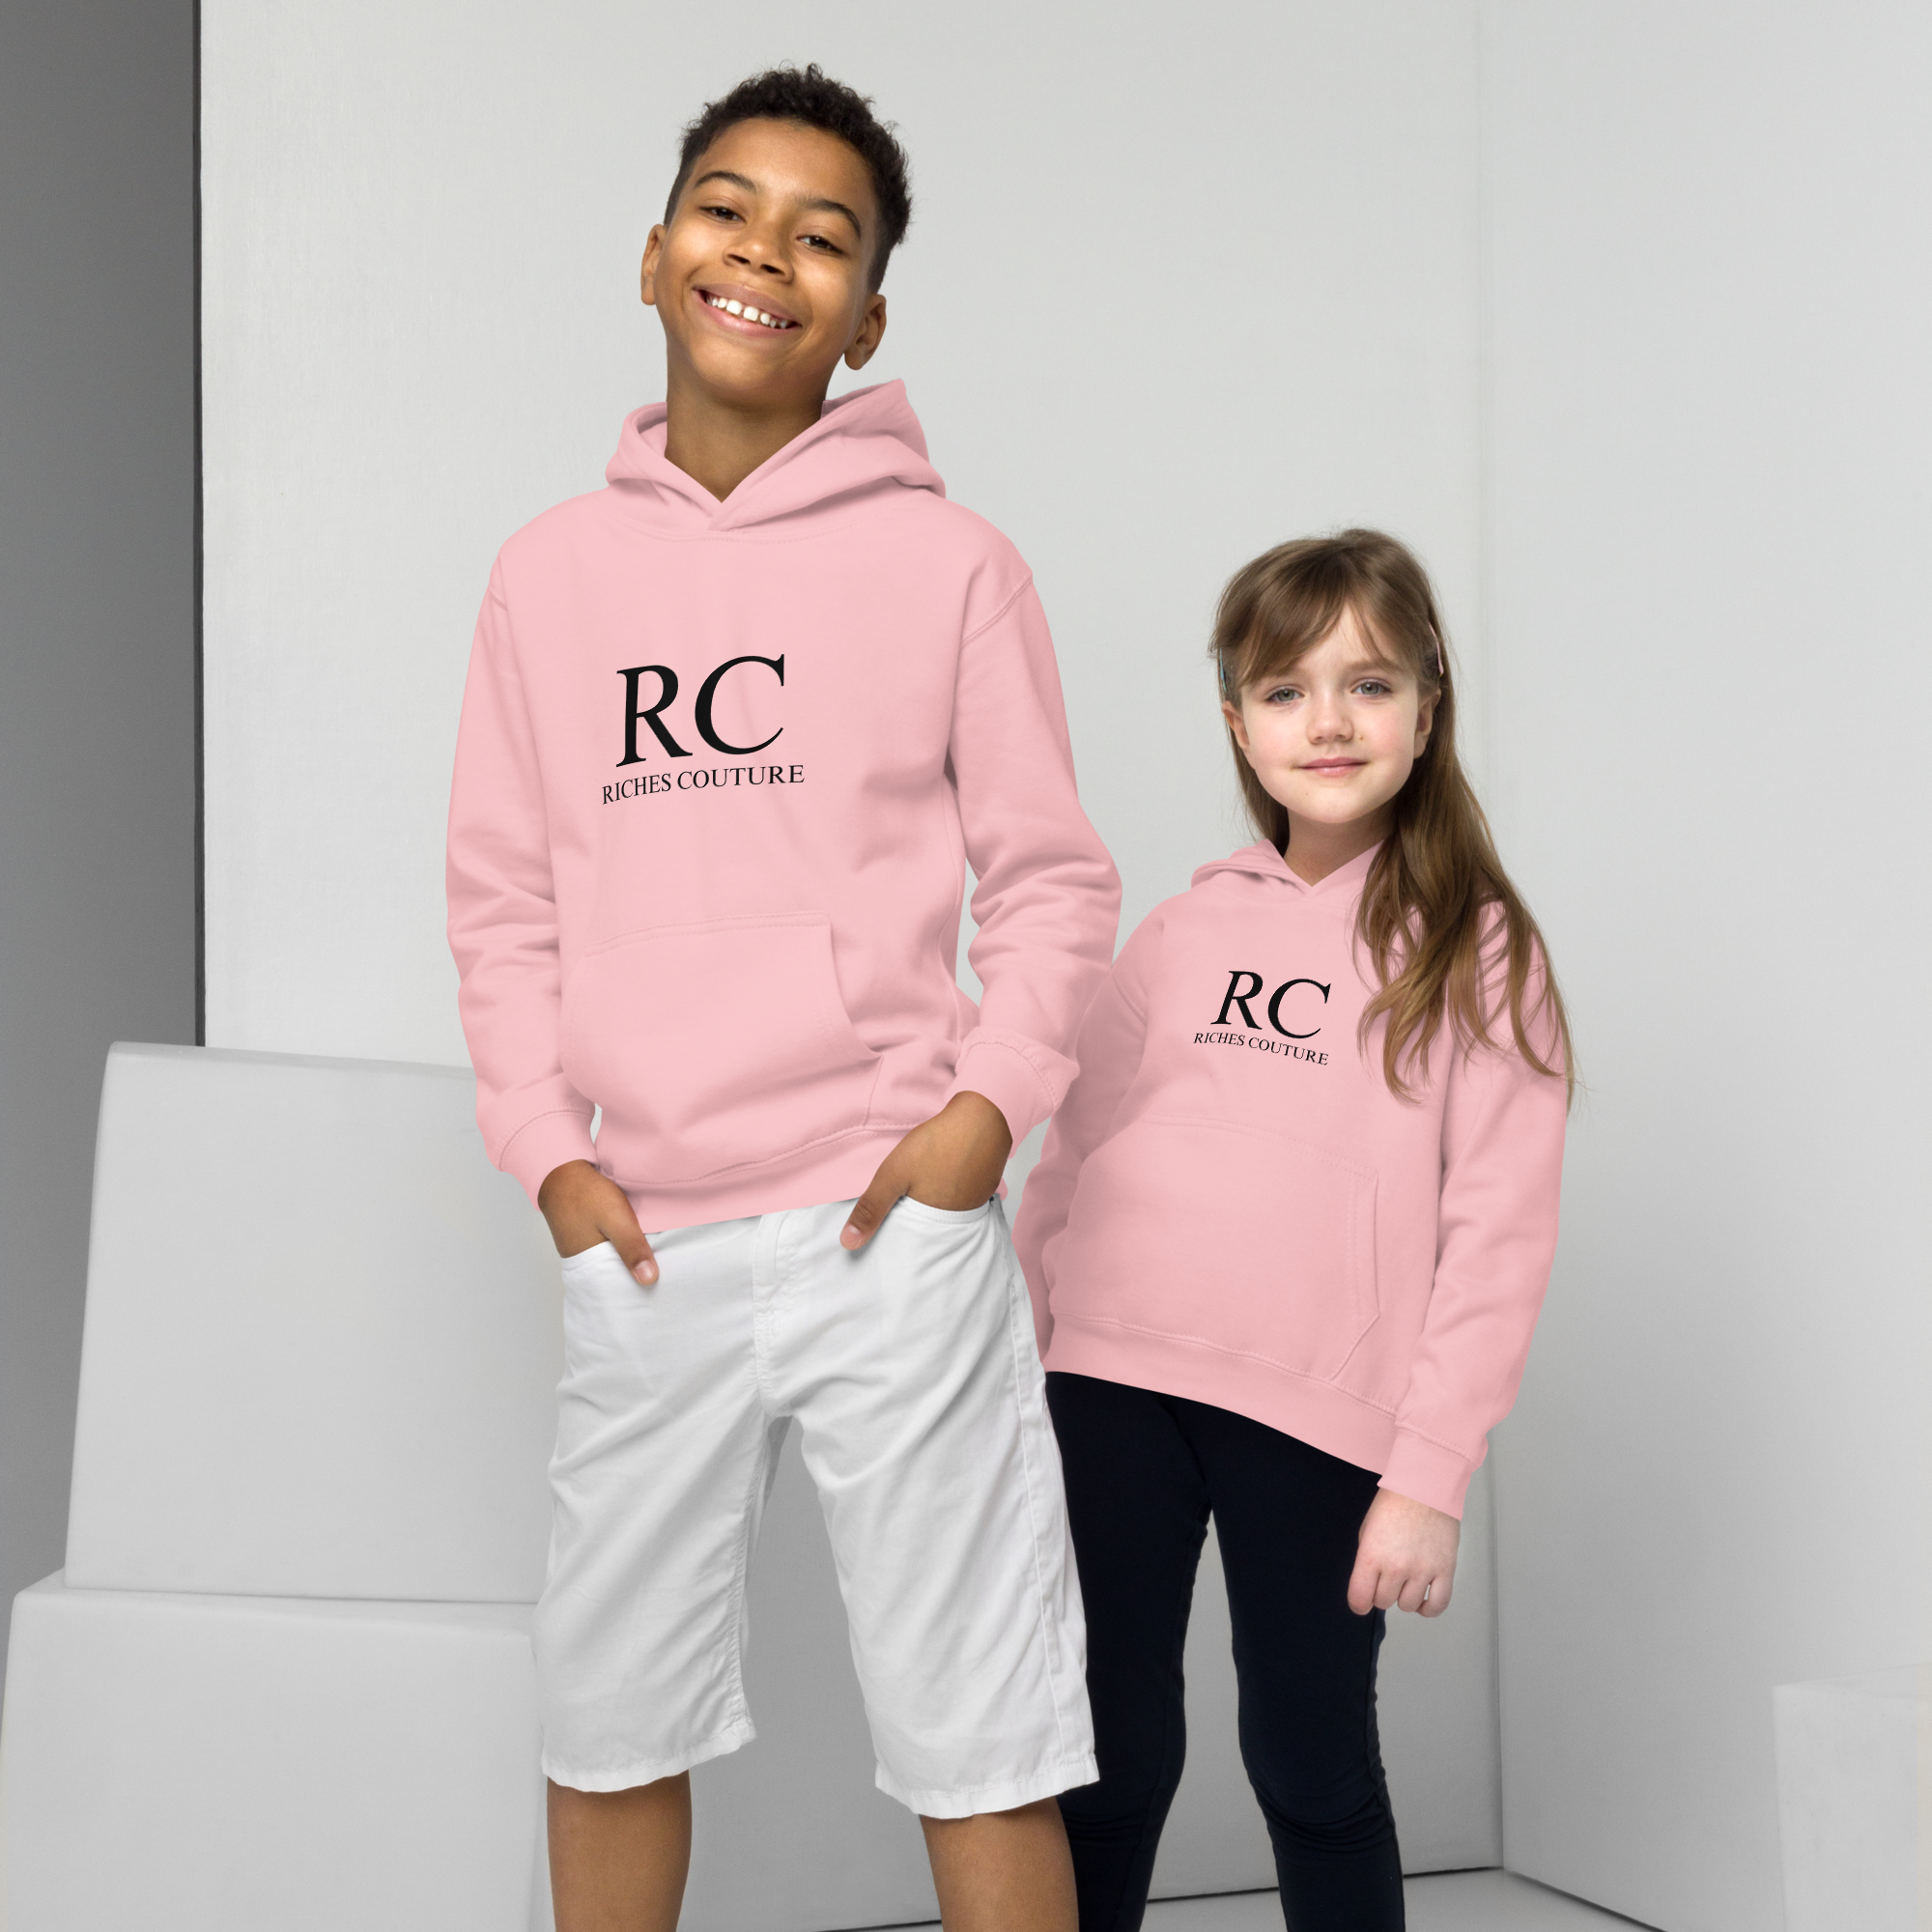 Riches Couture Girls Comfort Hoodie pink 